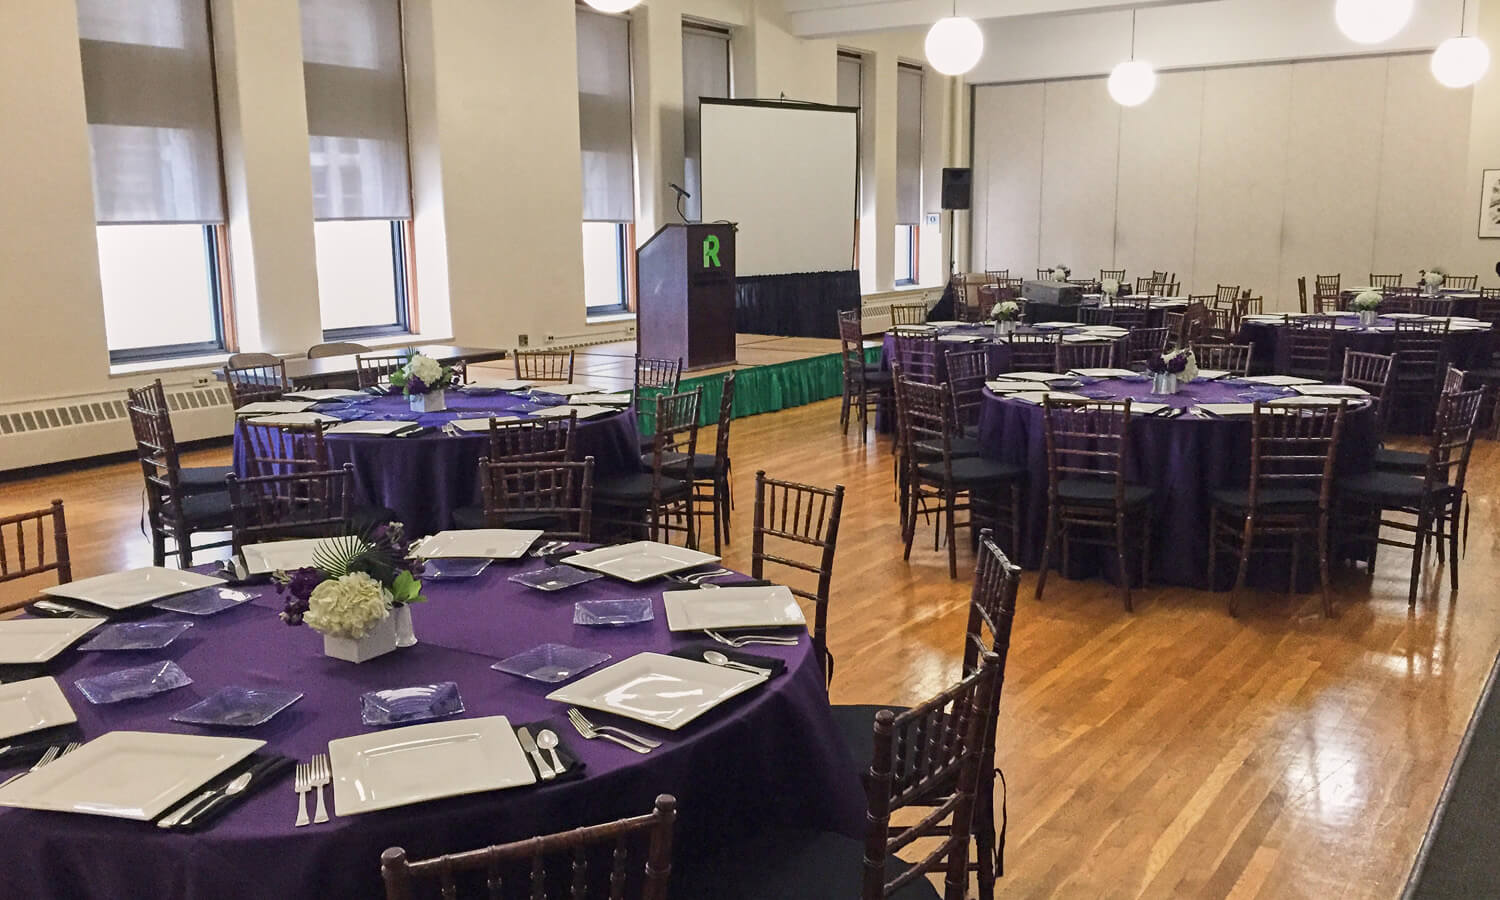 Large room with multiple dining tables set up for reception, with a speaker podium and presentation screen.